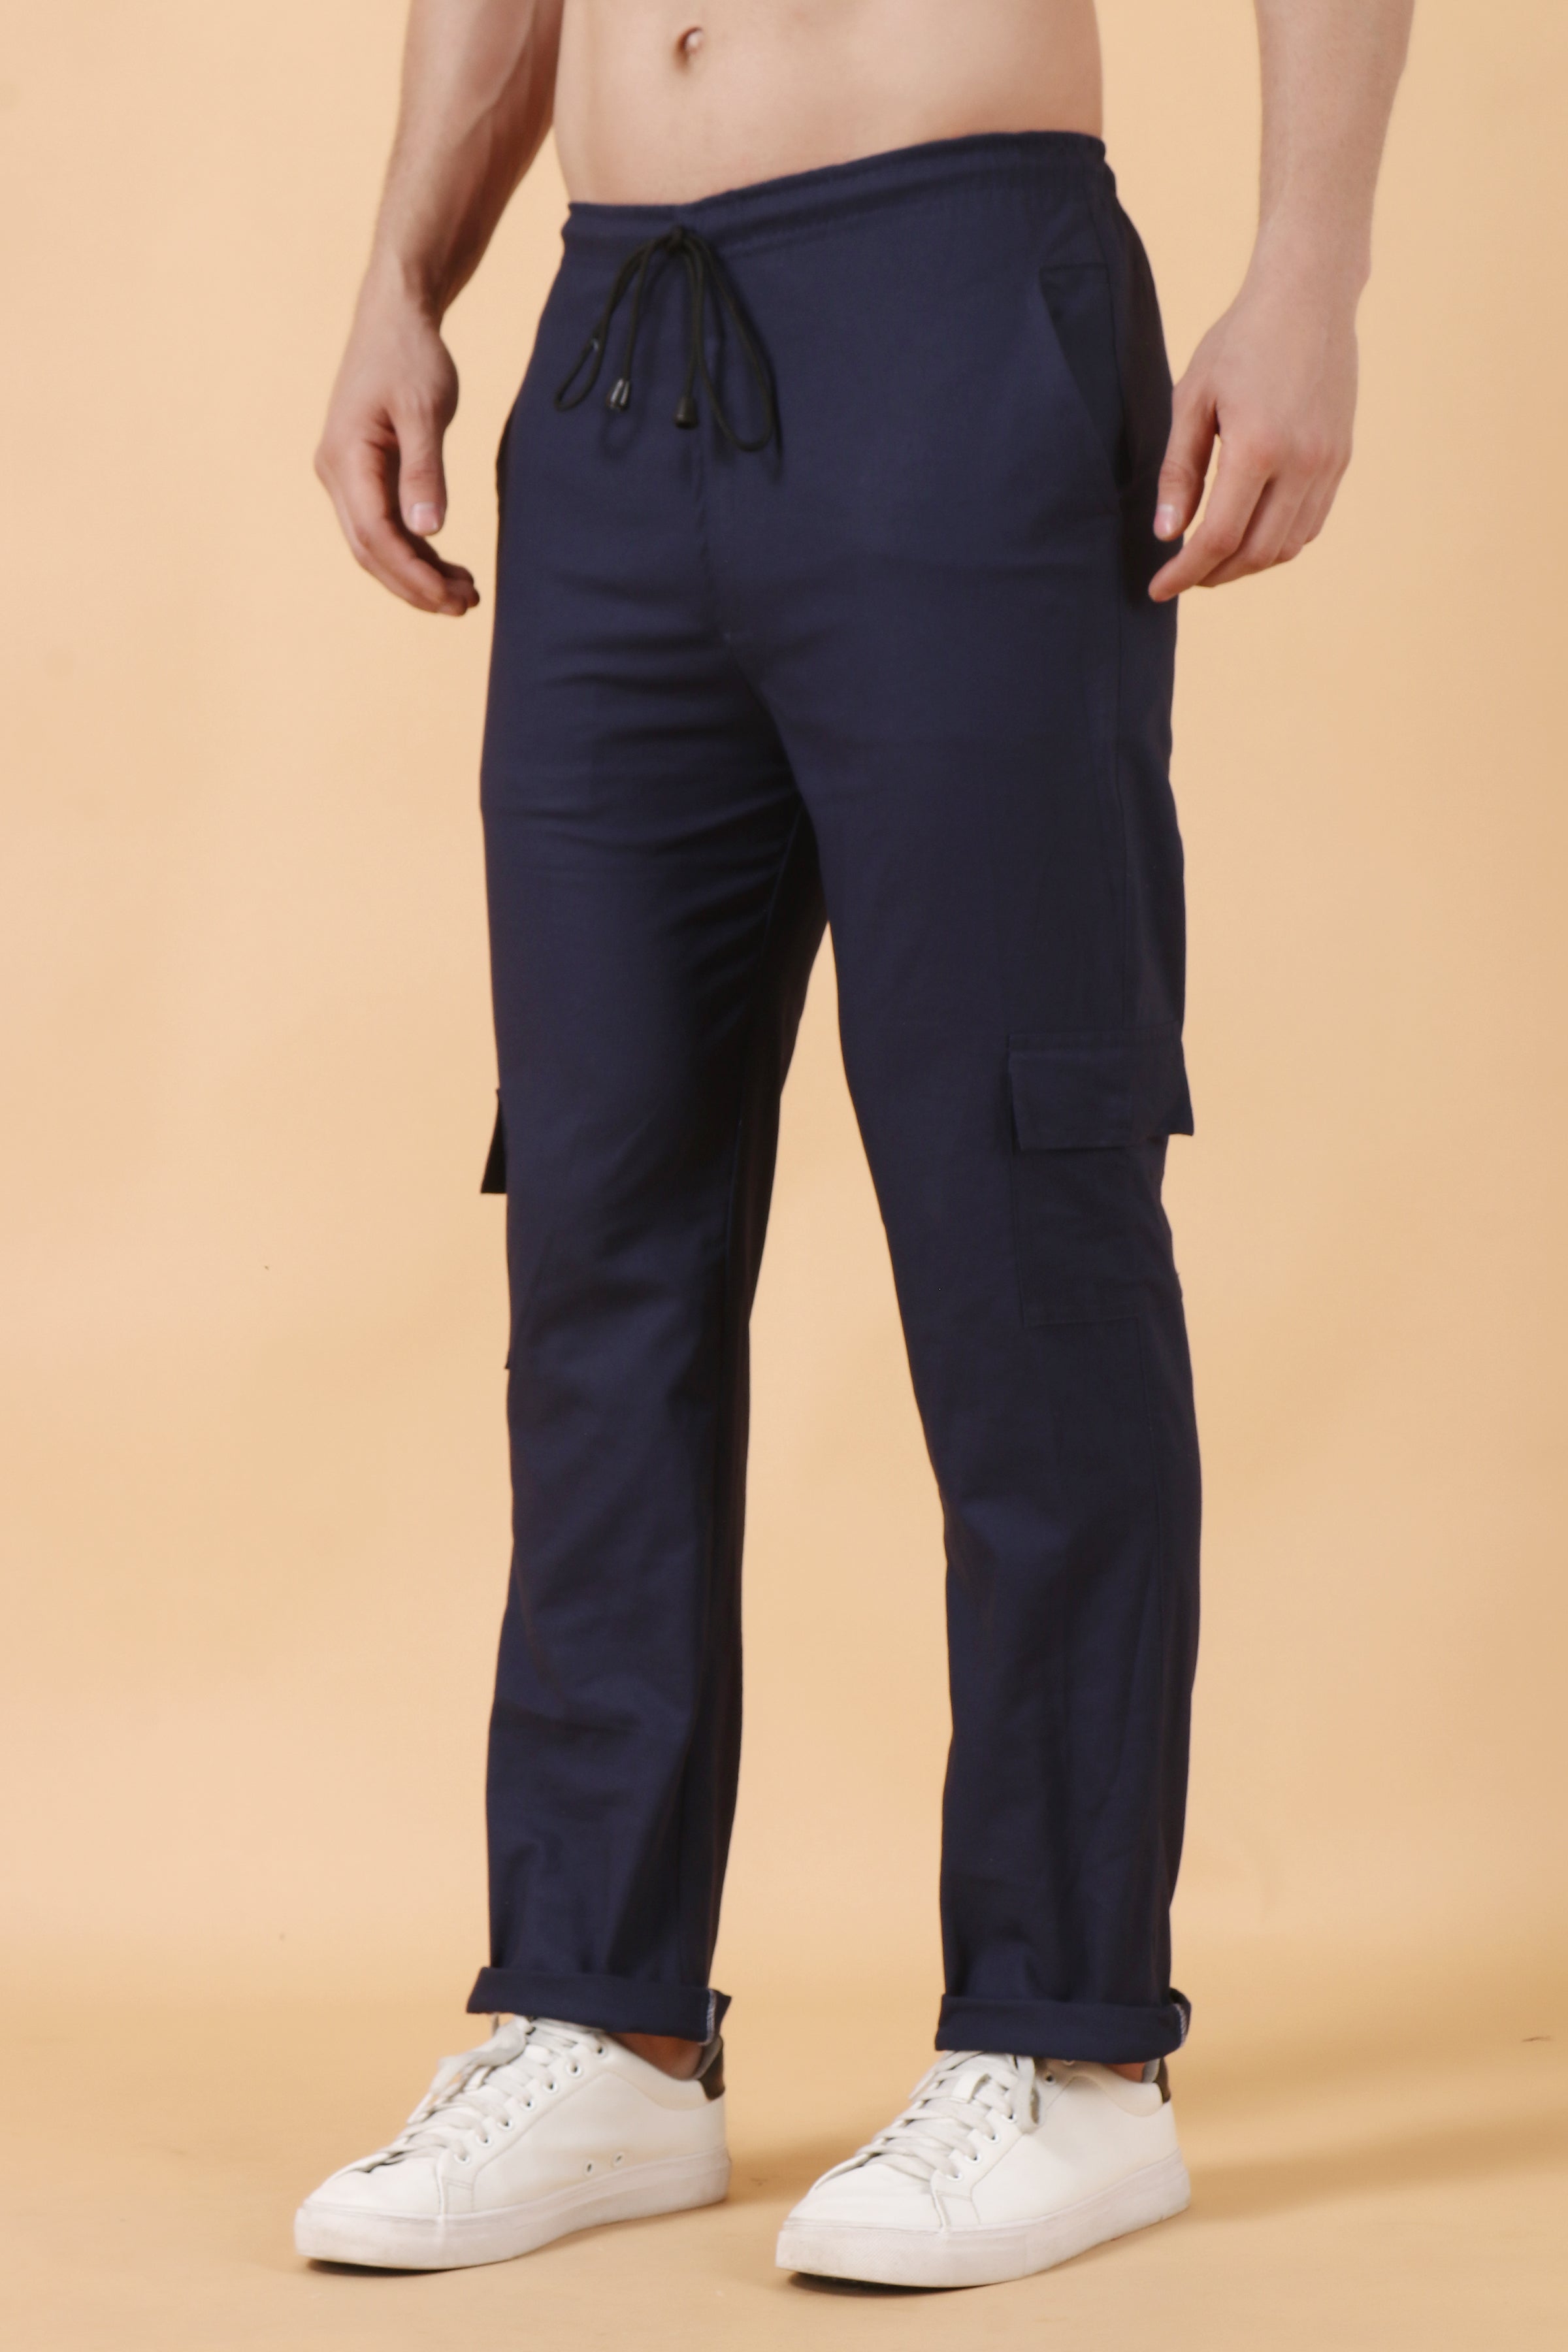 Buy The Roadster Lifestyle Co Men Slim Fit Pure Cotton Cargos  Trousers  for Men 5415202  Myntra